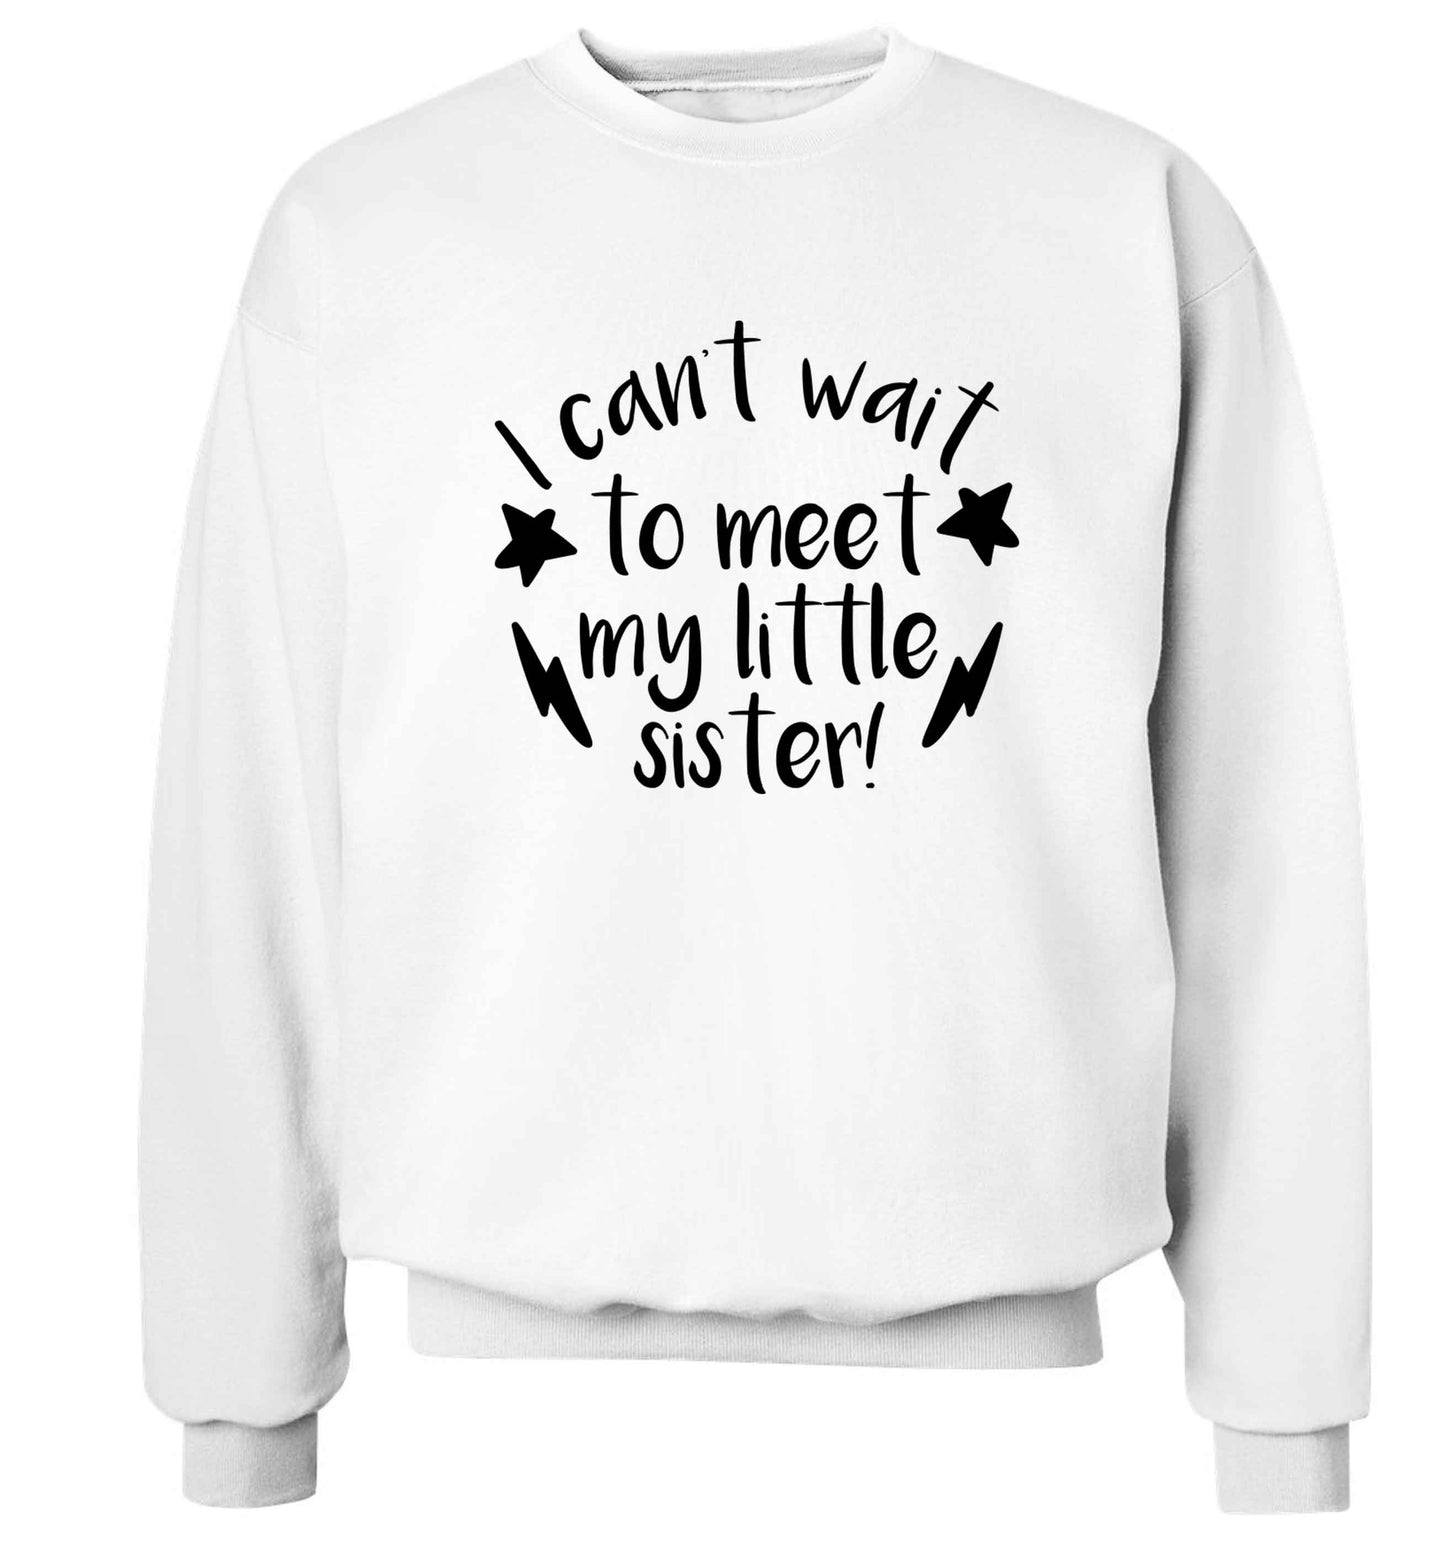 Something special growing inside it's my little sister I can't wait to say hi! Adult's unisex white Sweater 2XL